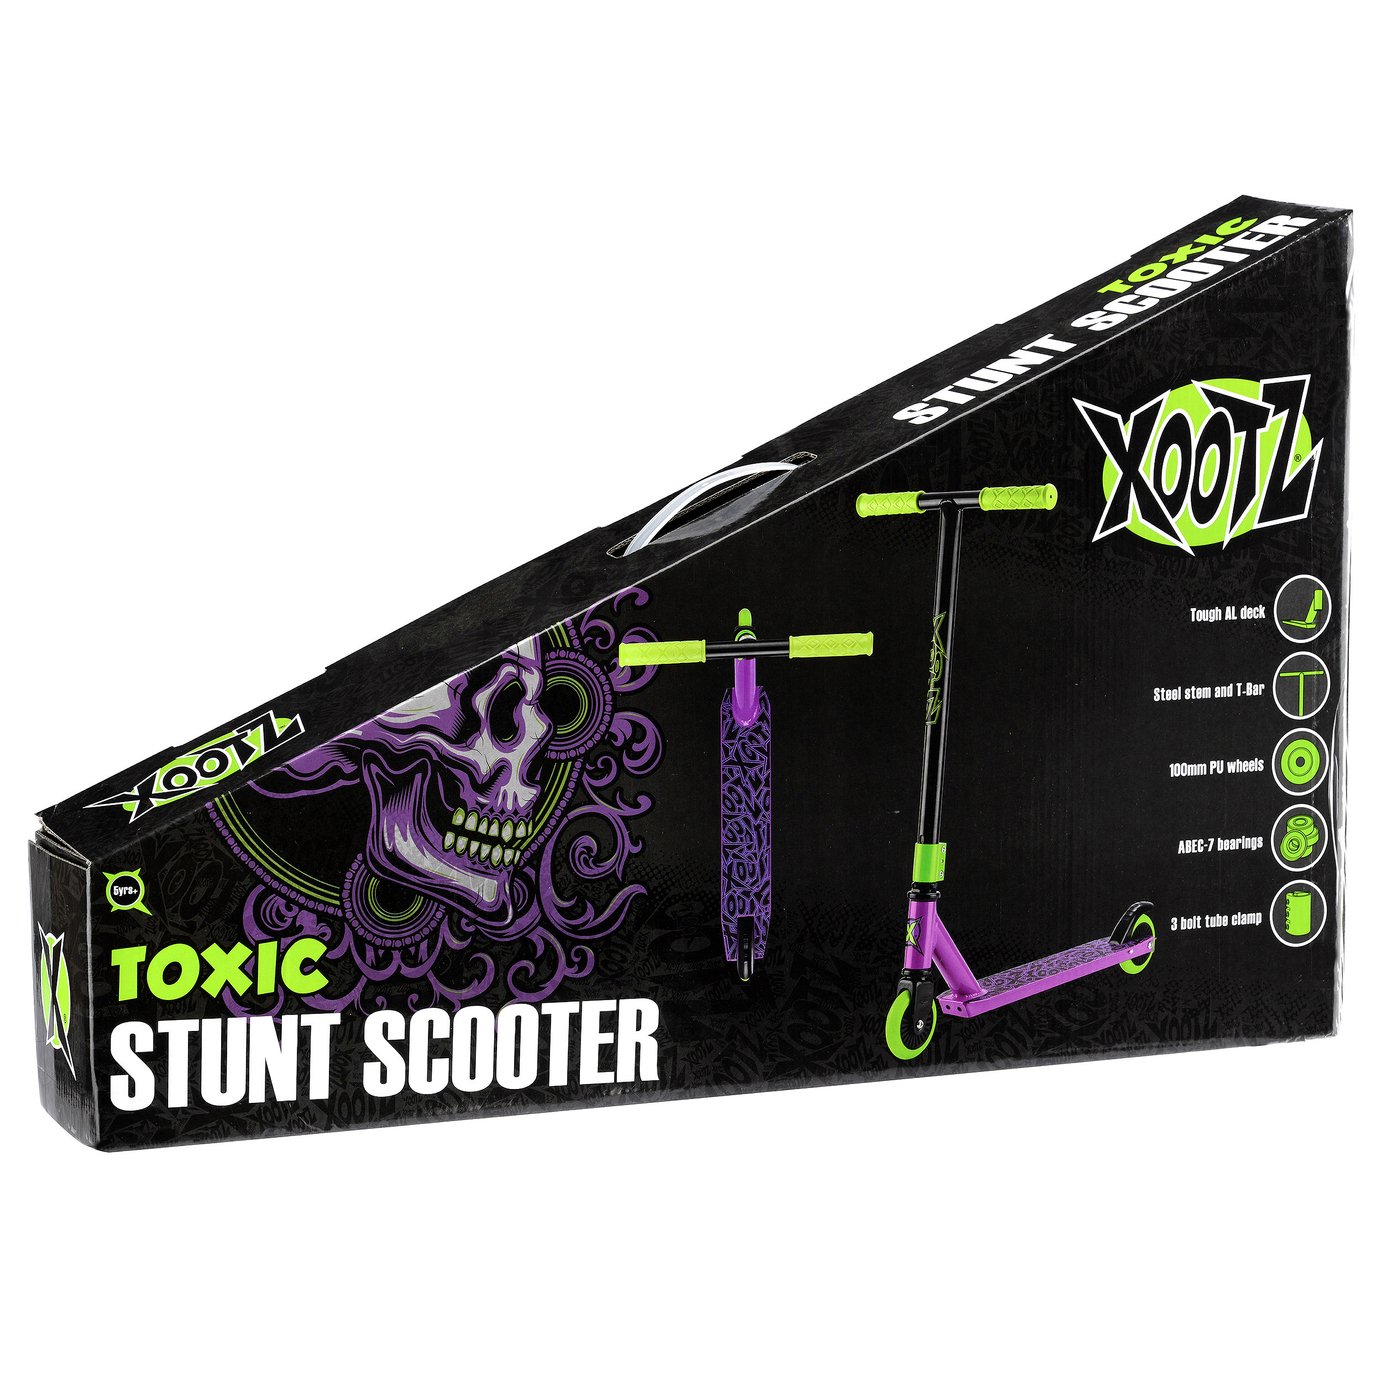 Xoo Stunt Scooter Review